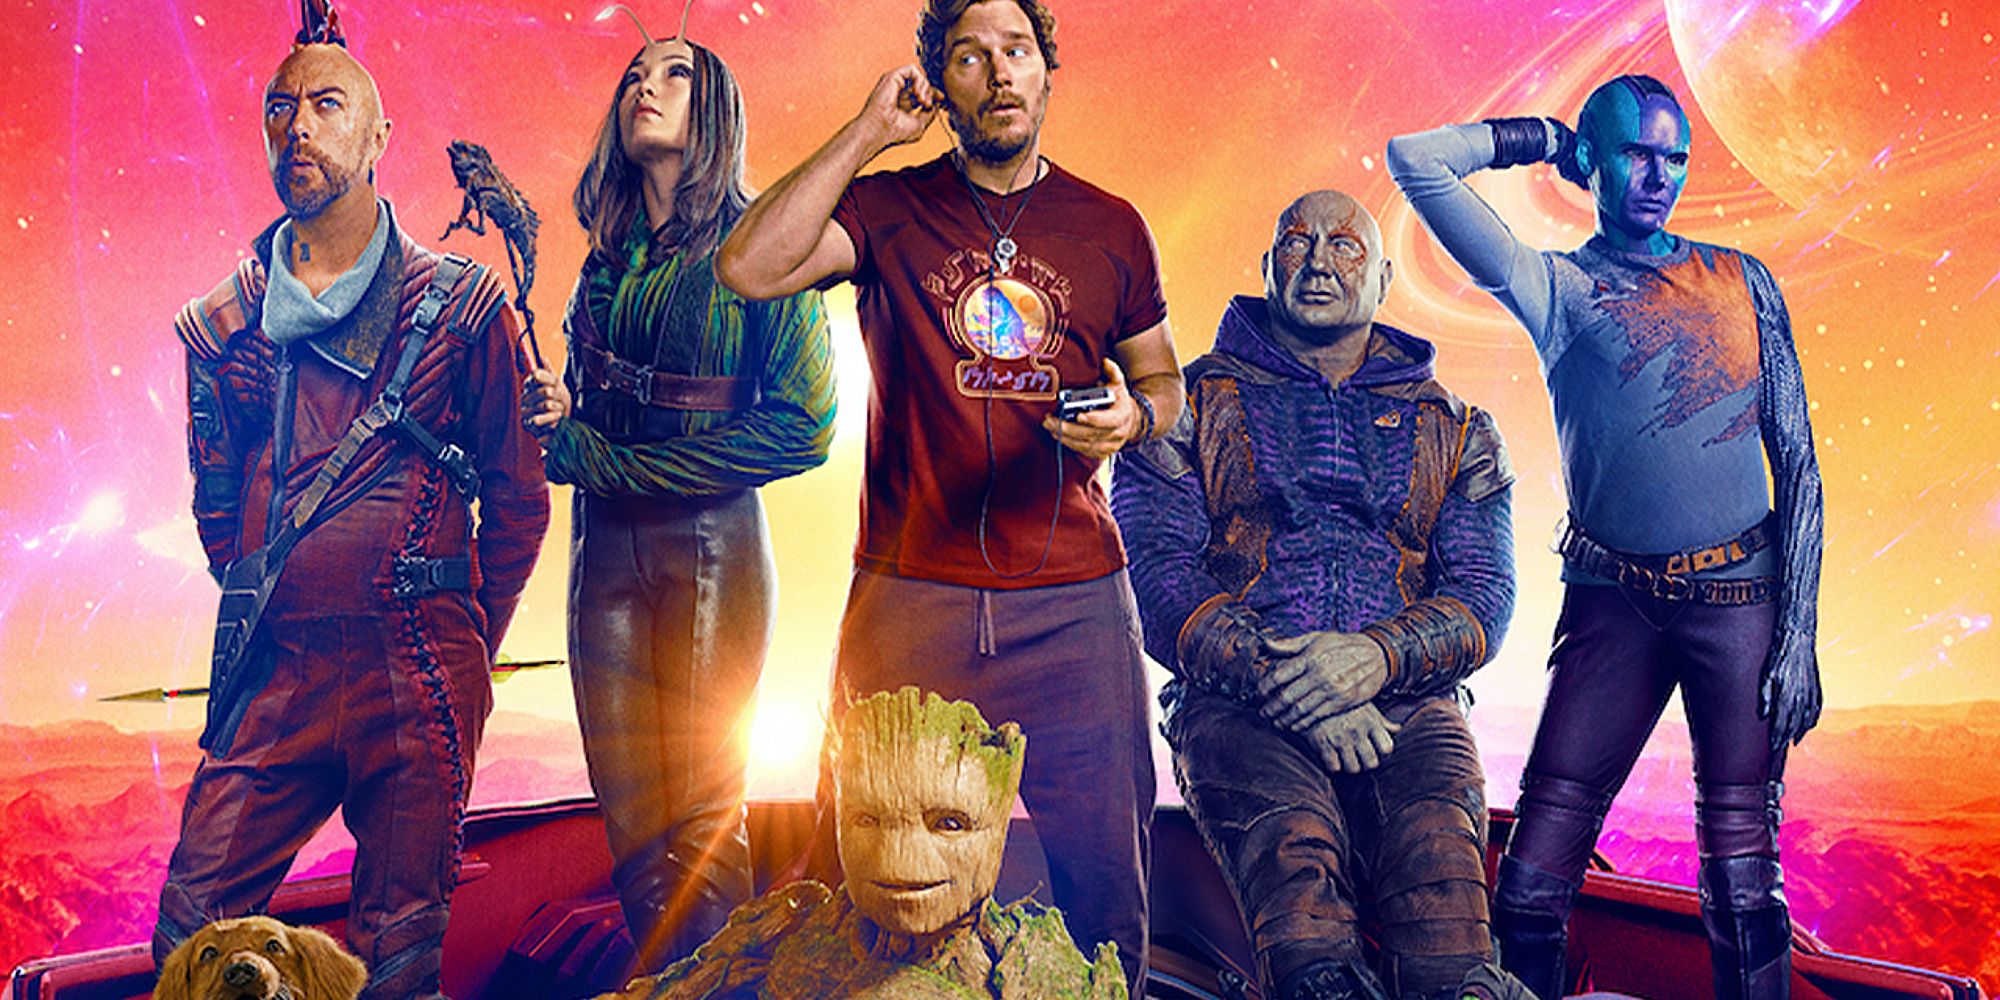 The central members of the team for Guardians of the Galaxy Vol. 3